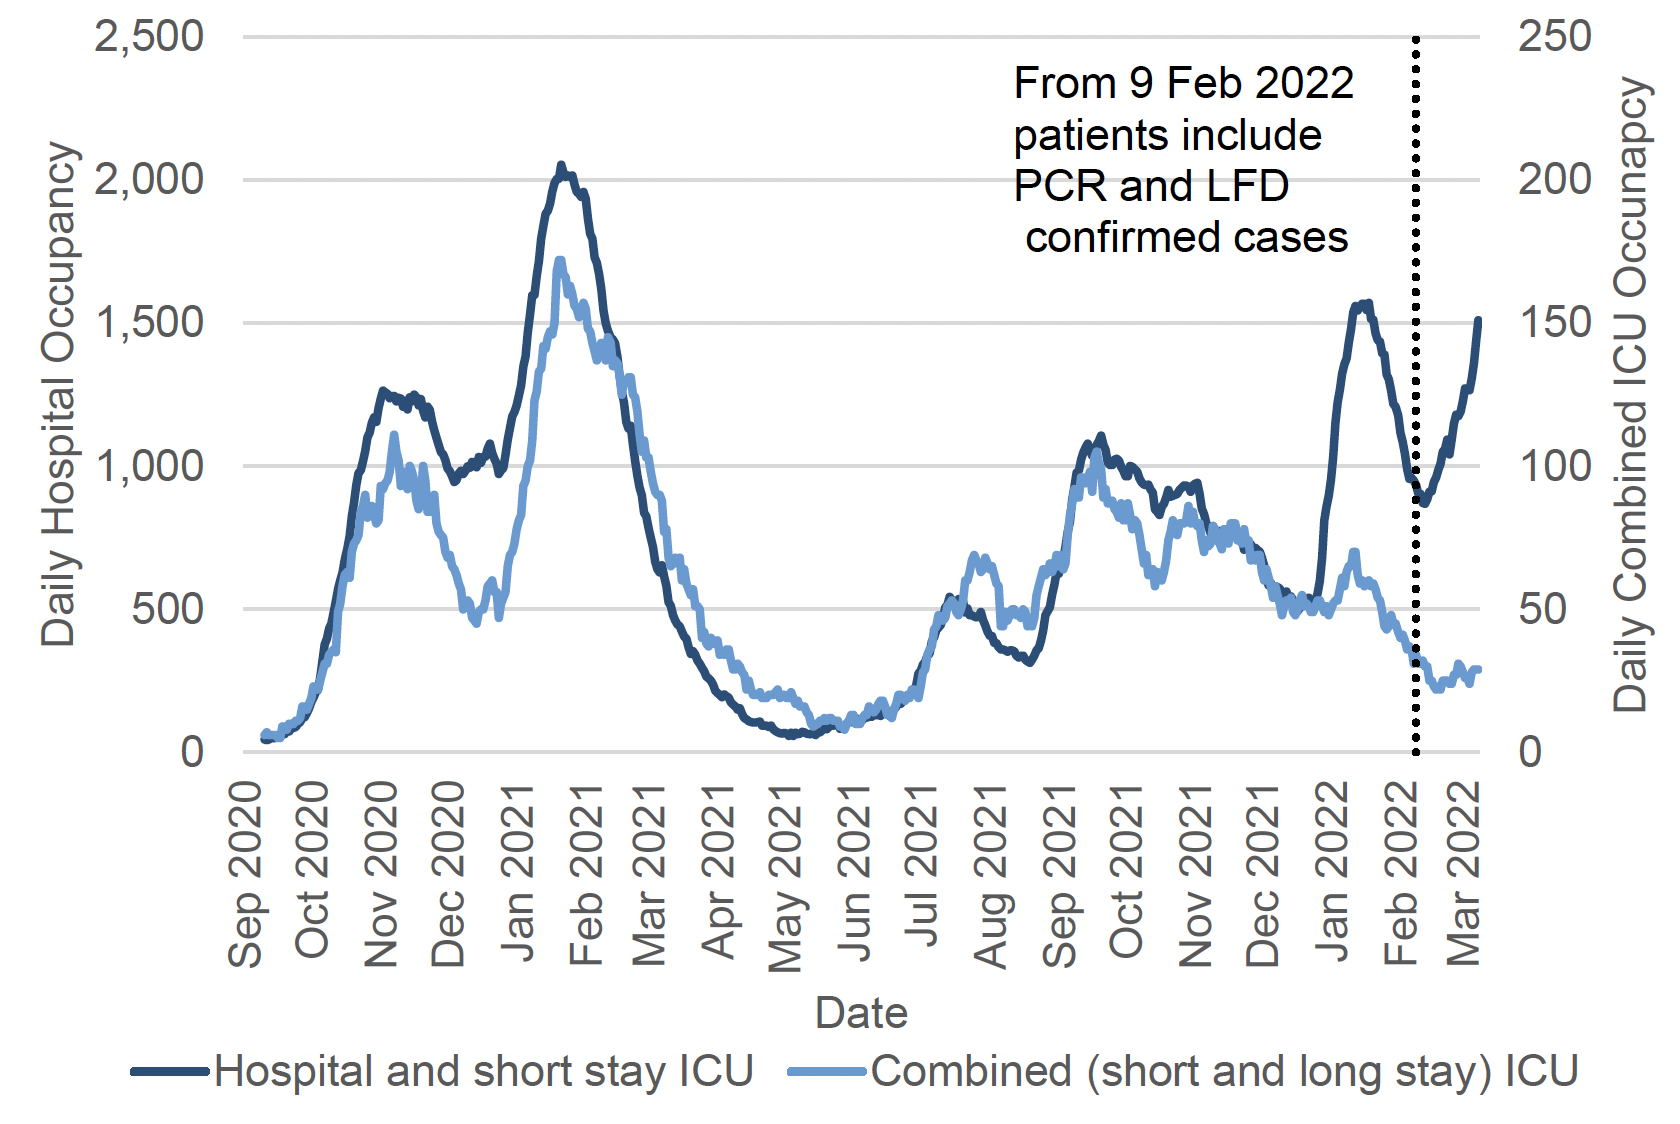 A line chart showing one line with the daily hospital occupancy (including short stay ICU) against the left axis and a line with ICU/HDU (including long and short stay) against the right axis, with recently confirmed Covid-19 since September 2020 until and including March 2022. The number of Covid-19 patients in hospital peaked in November 2020, January 2021, July 2021, September 2021, and January 2022, and has increased again since mid-February 2022. The number of Covid ICU patients peaked in November 2020, January 2021 and September 2021. The chart has a note that says: “from 9 February 2022 patients include PCR and LFD confirmed cases”. Before 9 February 2022, patients include only PCR confirmed cases.